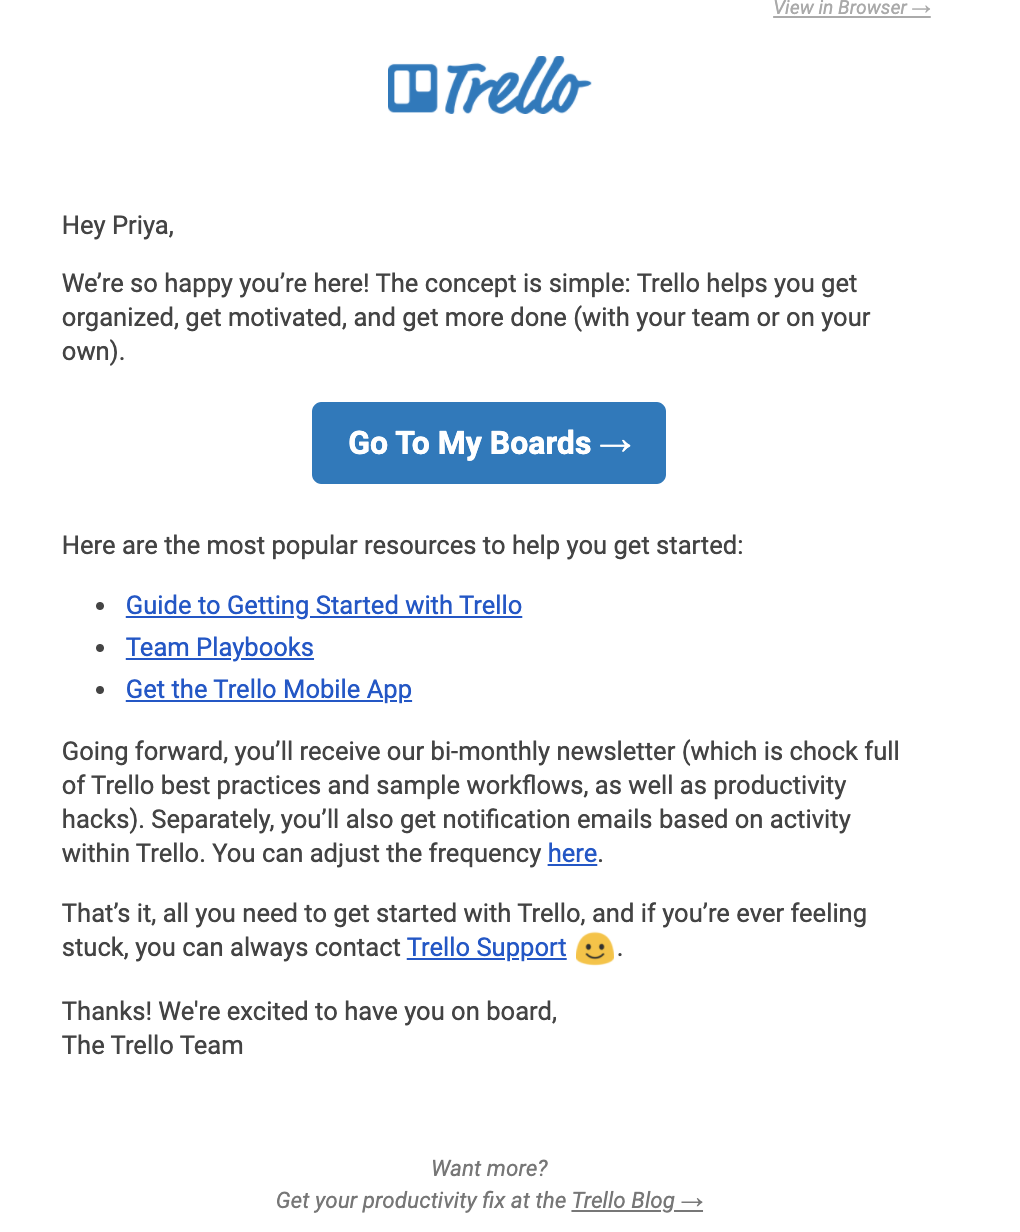 Trello's welcome email